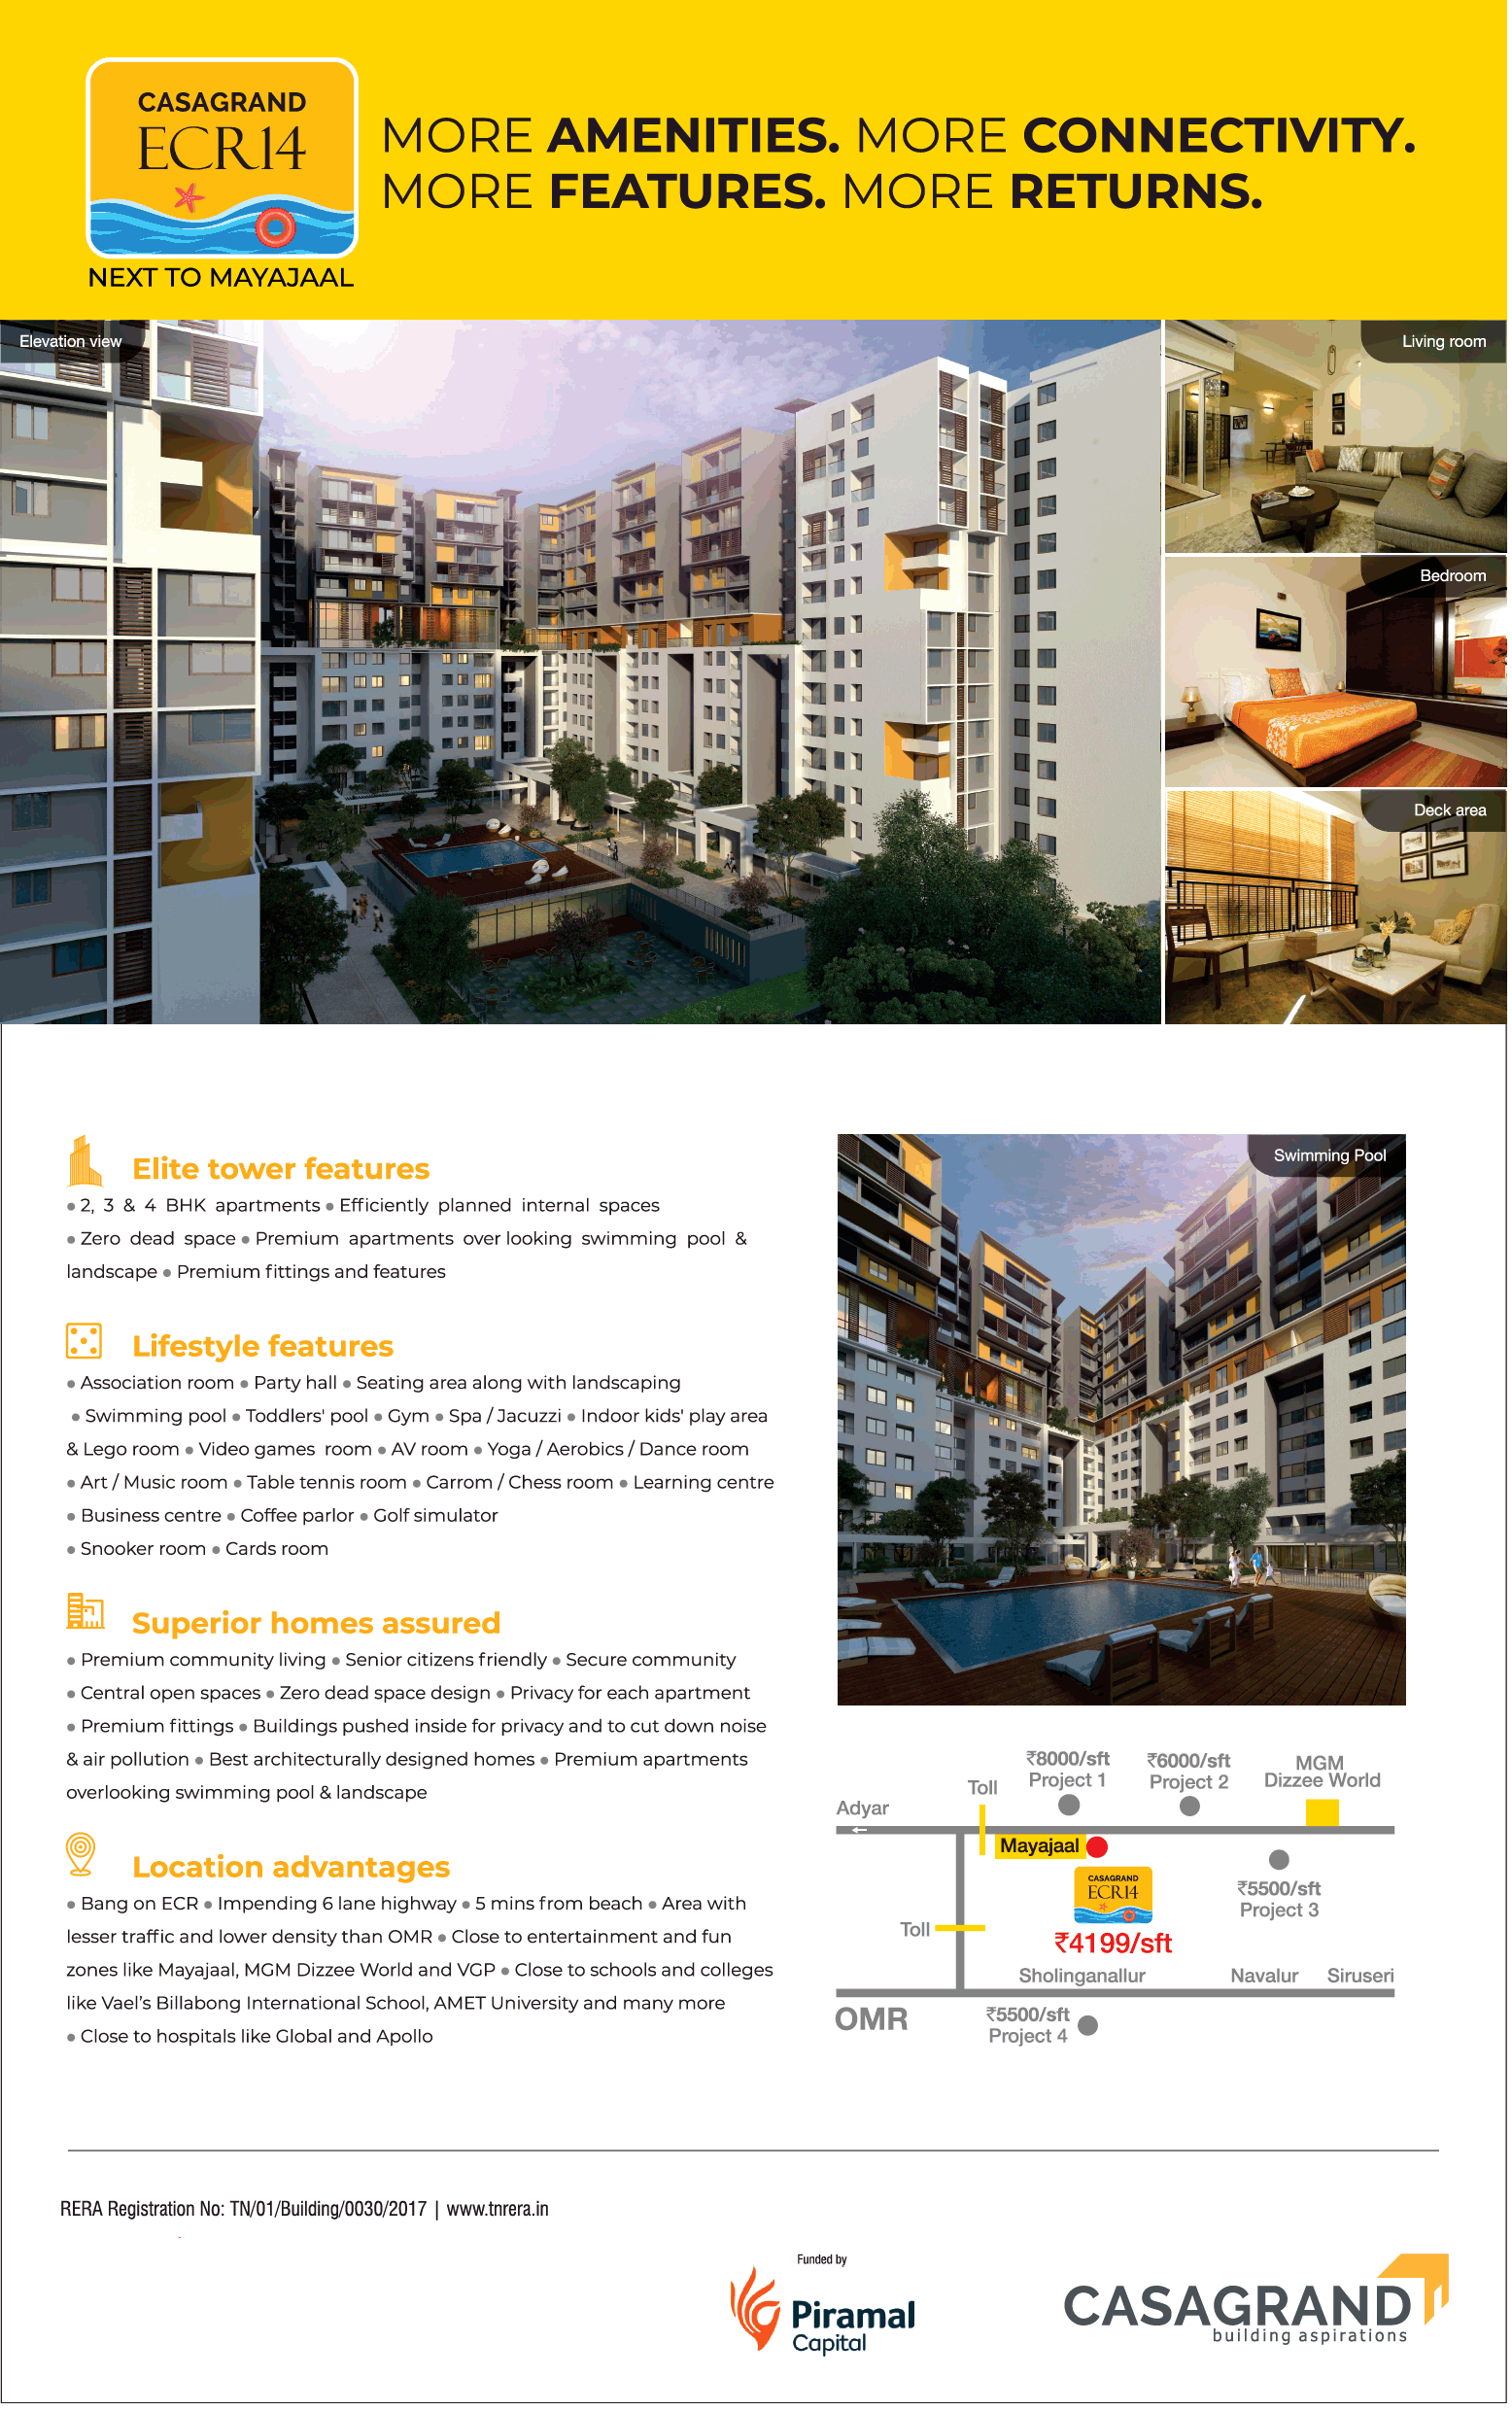 Avail More Amenities, Connectivity, Features, Returns at Casagrand ECR14 in Chennai Update